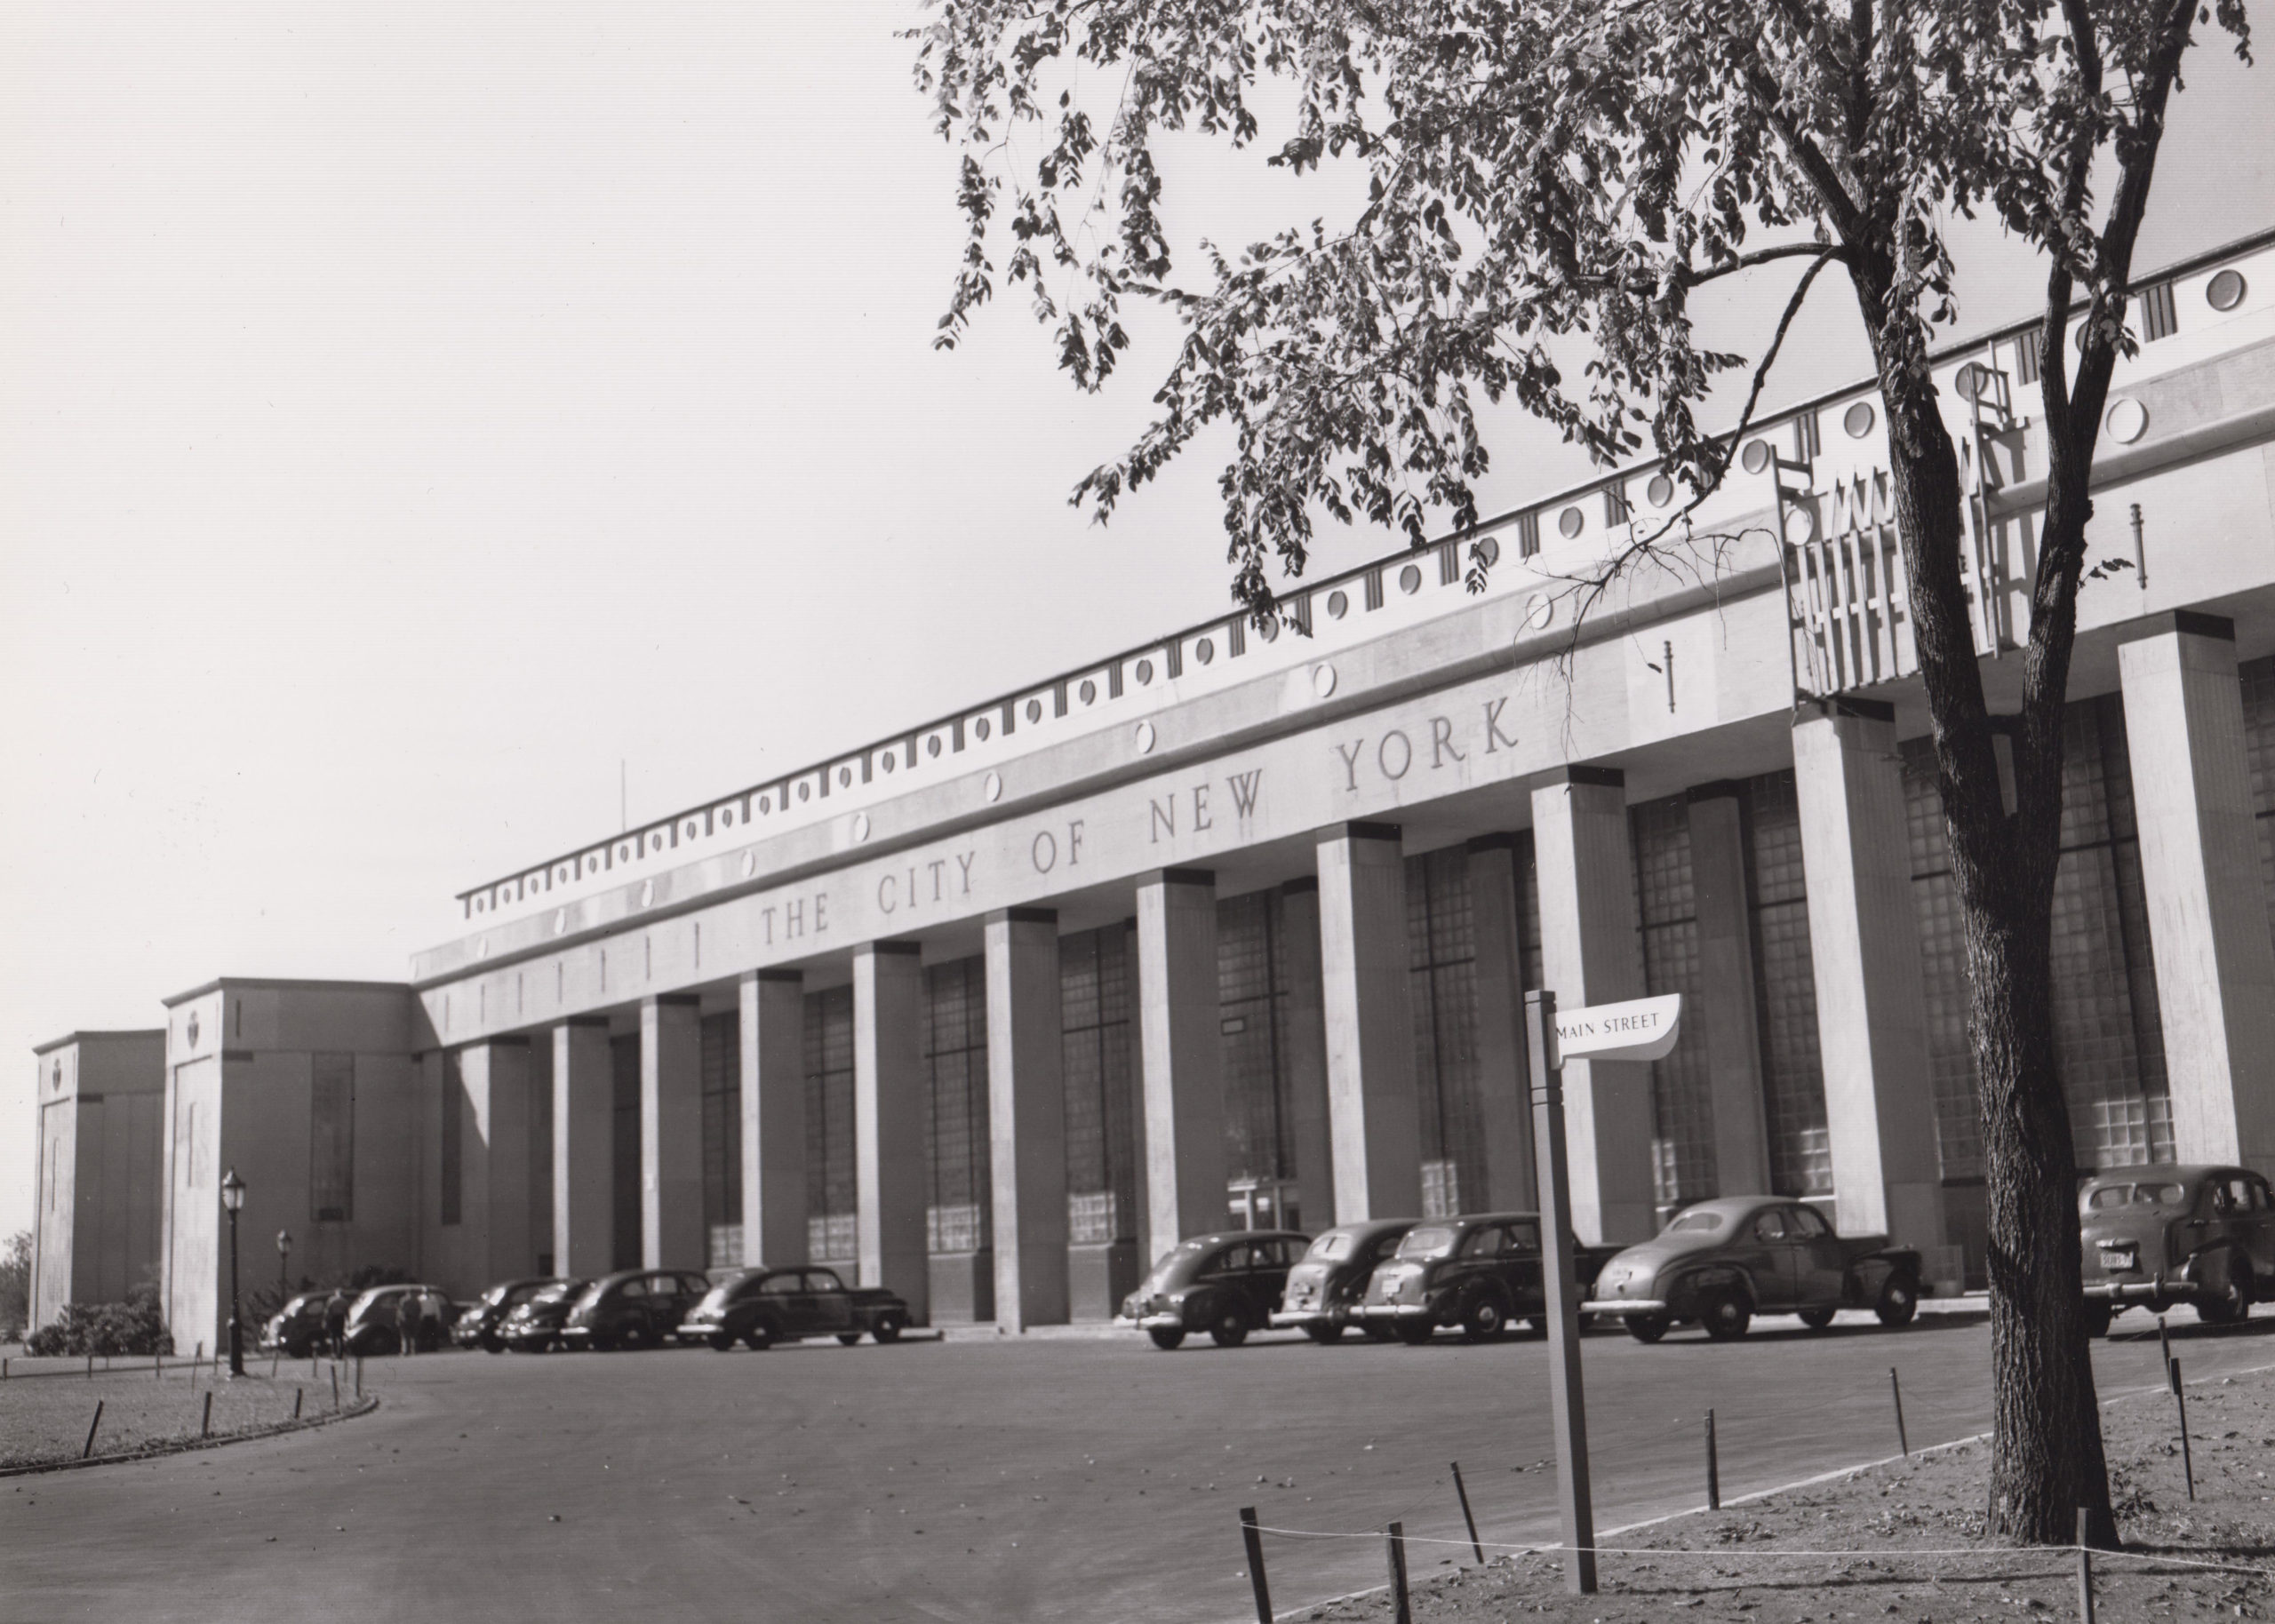 A black and white photo of the New York City Building. It has a long rectangular shape with a row of square columns. At the top of the building in uppercase font reads “THE CITY OF NEW YORK”. In the parking lot, in front of the building, are nine cars parked in a row and a street sign, to the right, that reads “MAIN STREET '' in uppercase font.